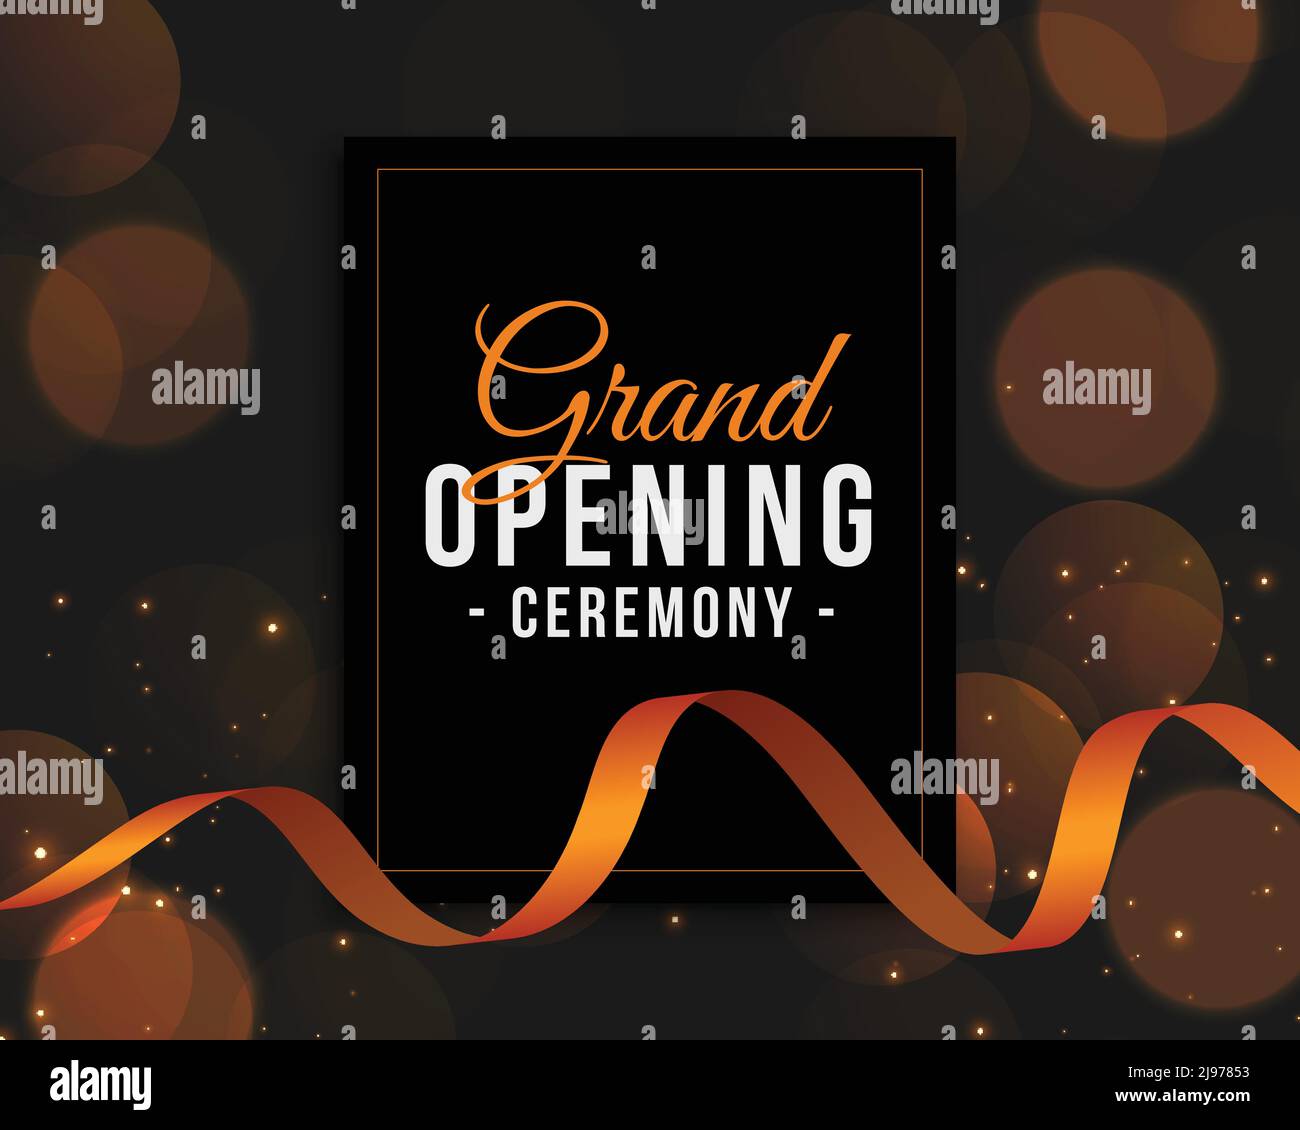 Grand opening ceremony invitation template layout Vector Image